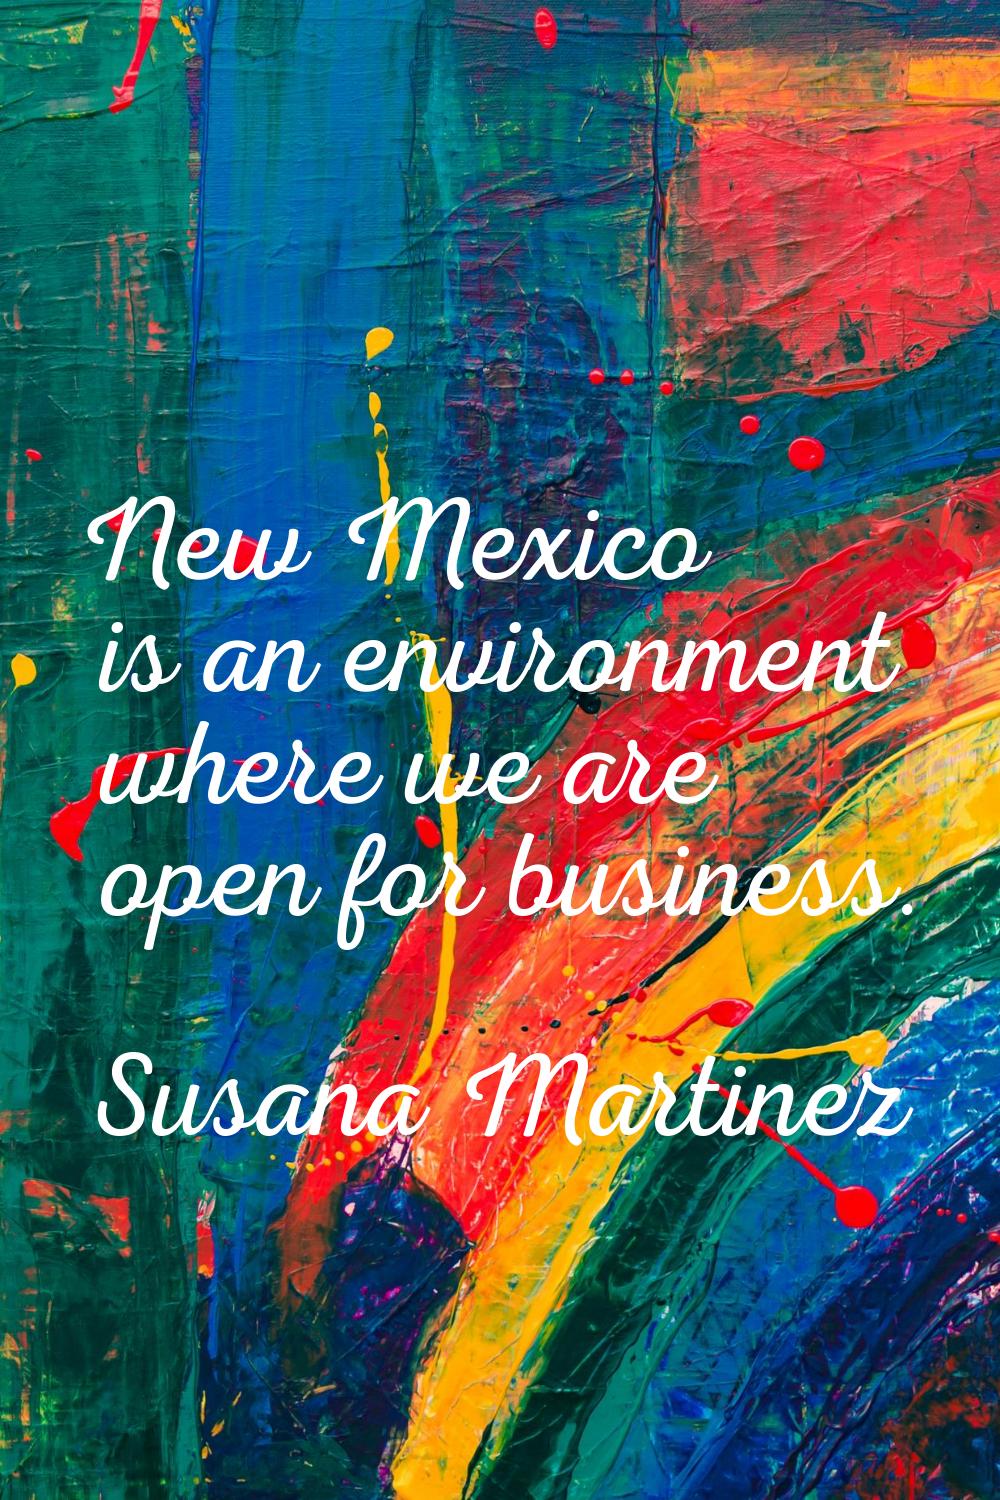 New Mexico is an environment where we are open for business.